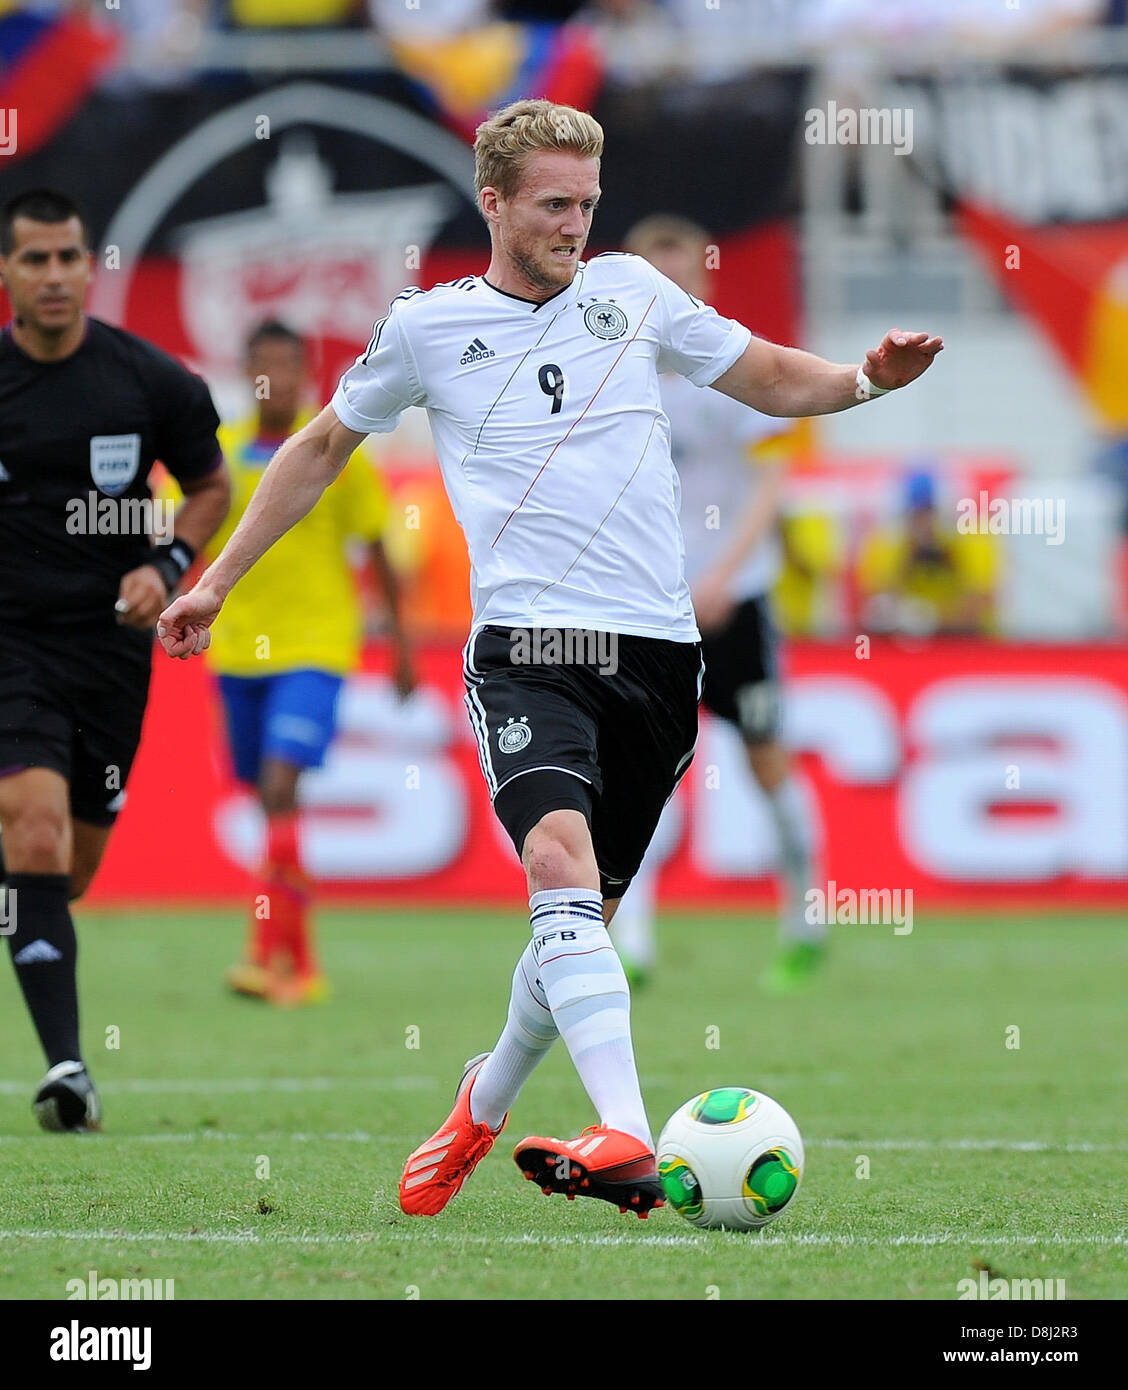 Andre Schürrle of Germany during the international friendly soccer match between Germany and Ecuador at FAU stadium in Boca Raton, Florida, USA, 29 May 2013. Photo: Thomas Eisenhuth/dpa Stock Photo